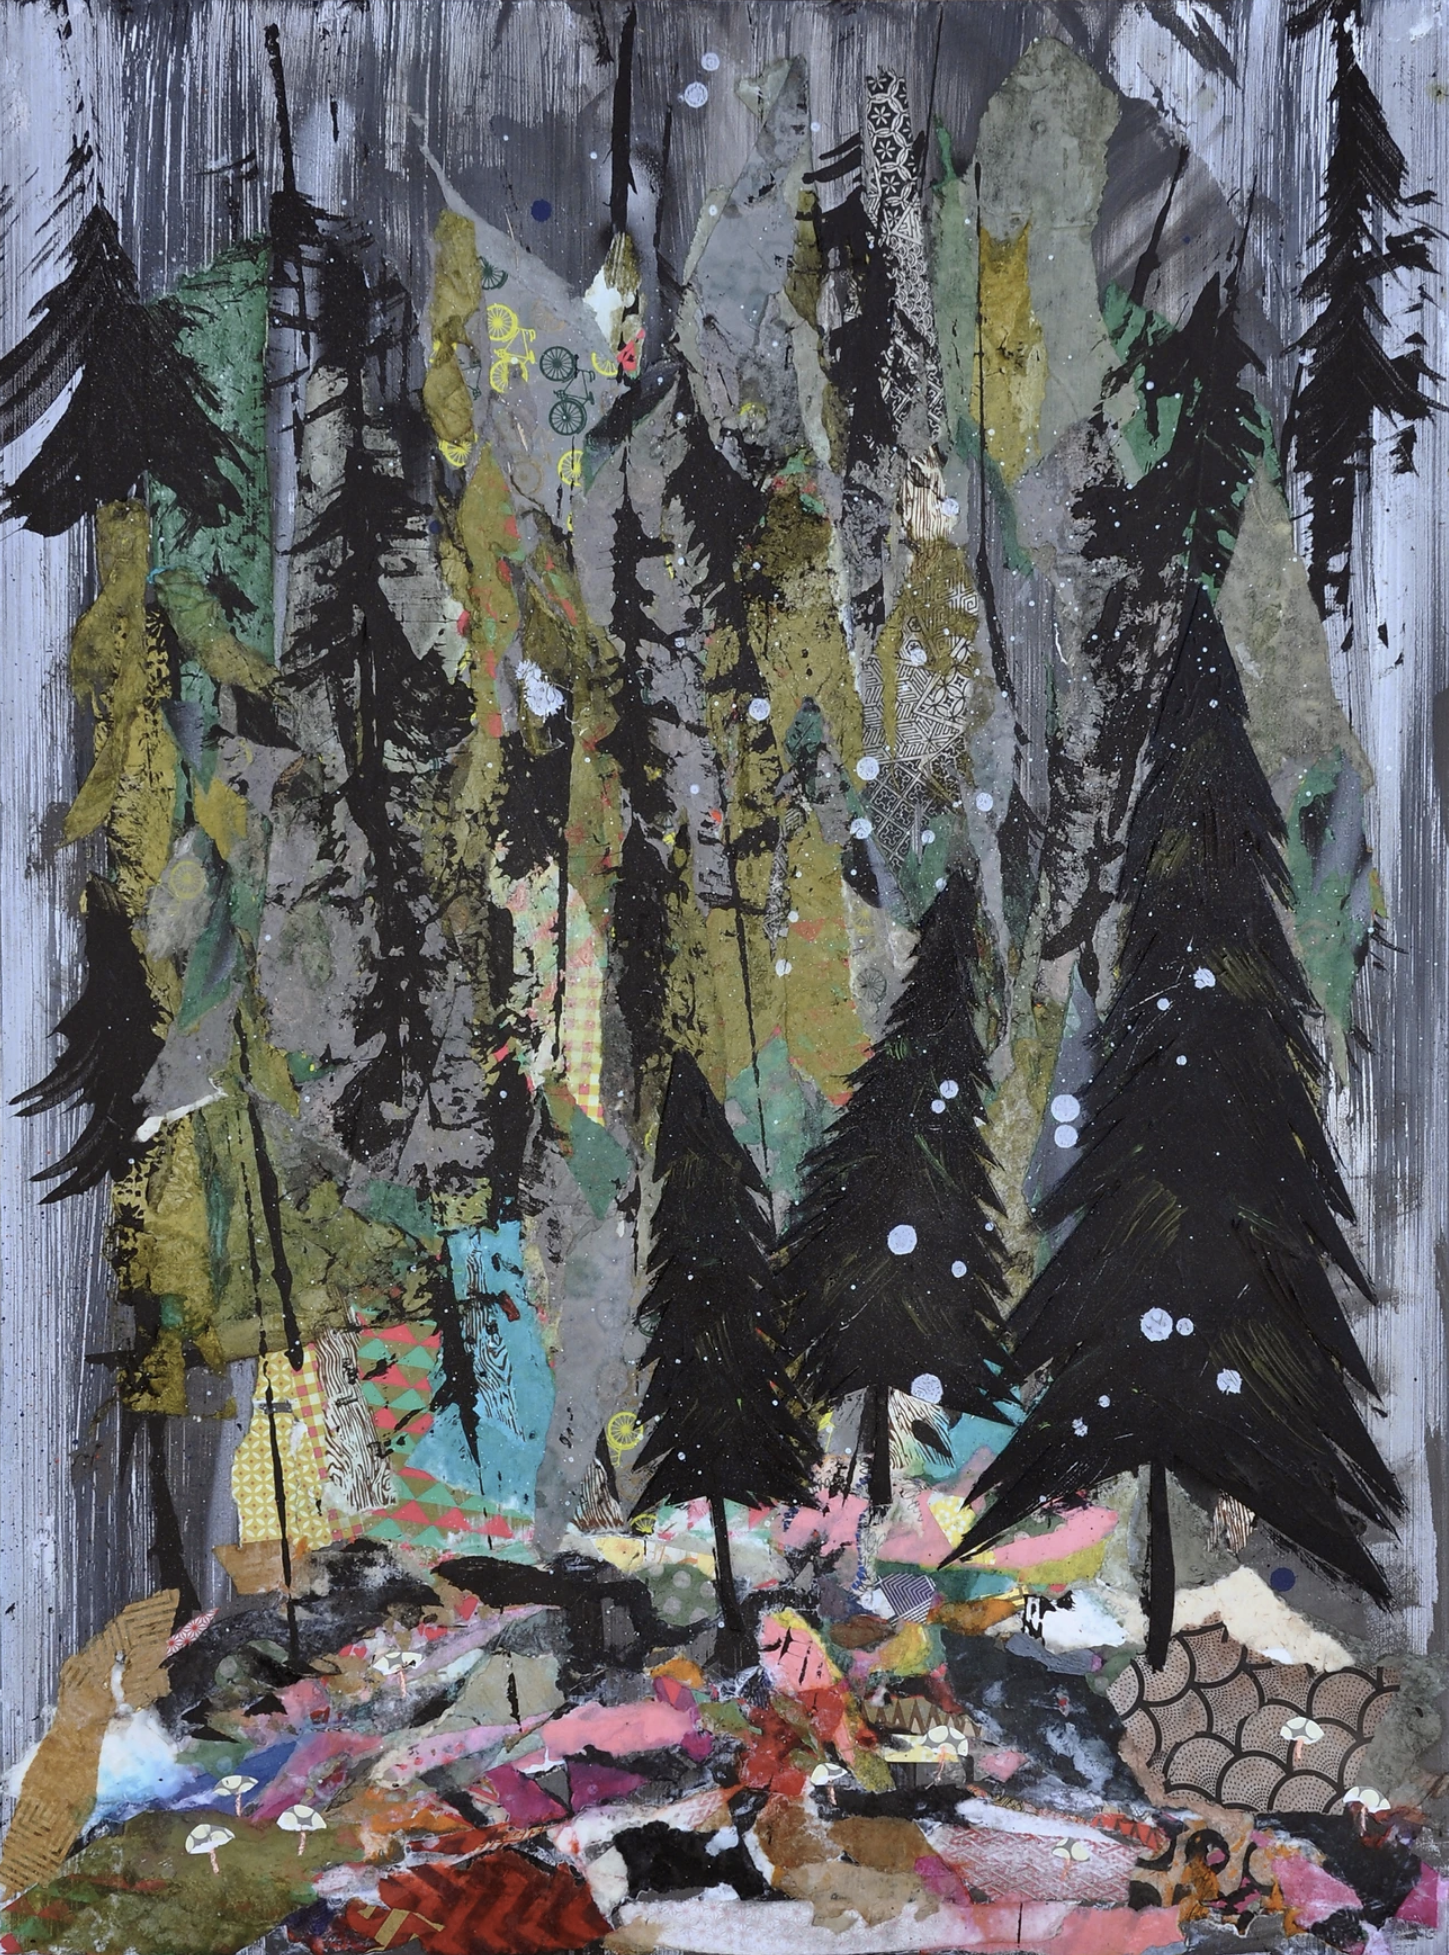 We Can Build a Tree House in the Pine Forest 2015 (36"x48") Mixed media collage and oil on panel board.